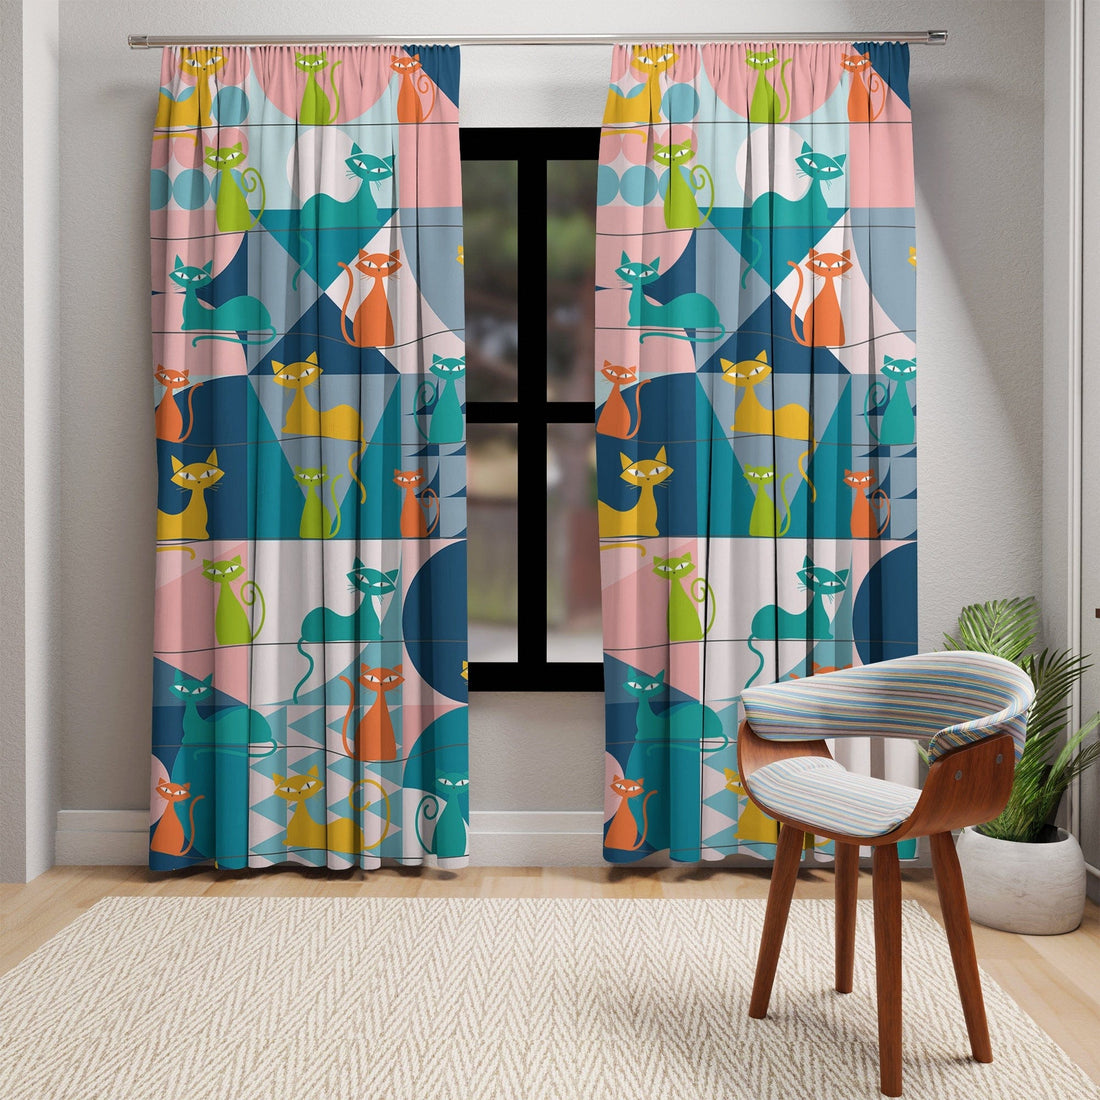 Mid Century Modern Atomic Kitschy Cats Window Curtain in Geometric Retro Teal, Pink, Orange, and Yellow, Sheer &amp; Blackout MCM Window Panels